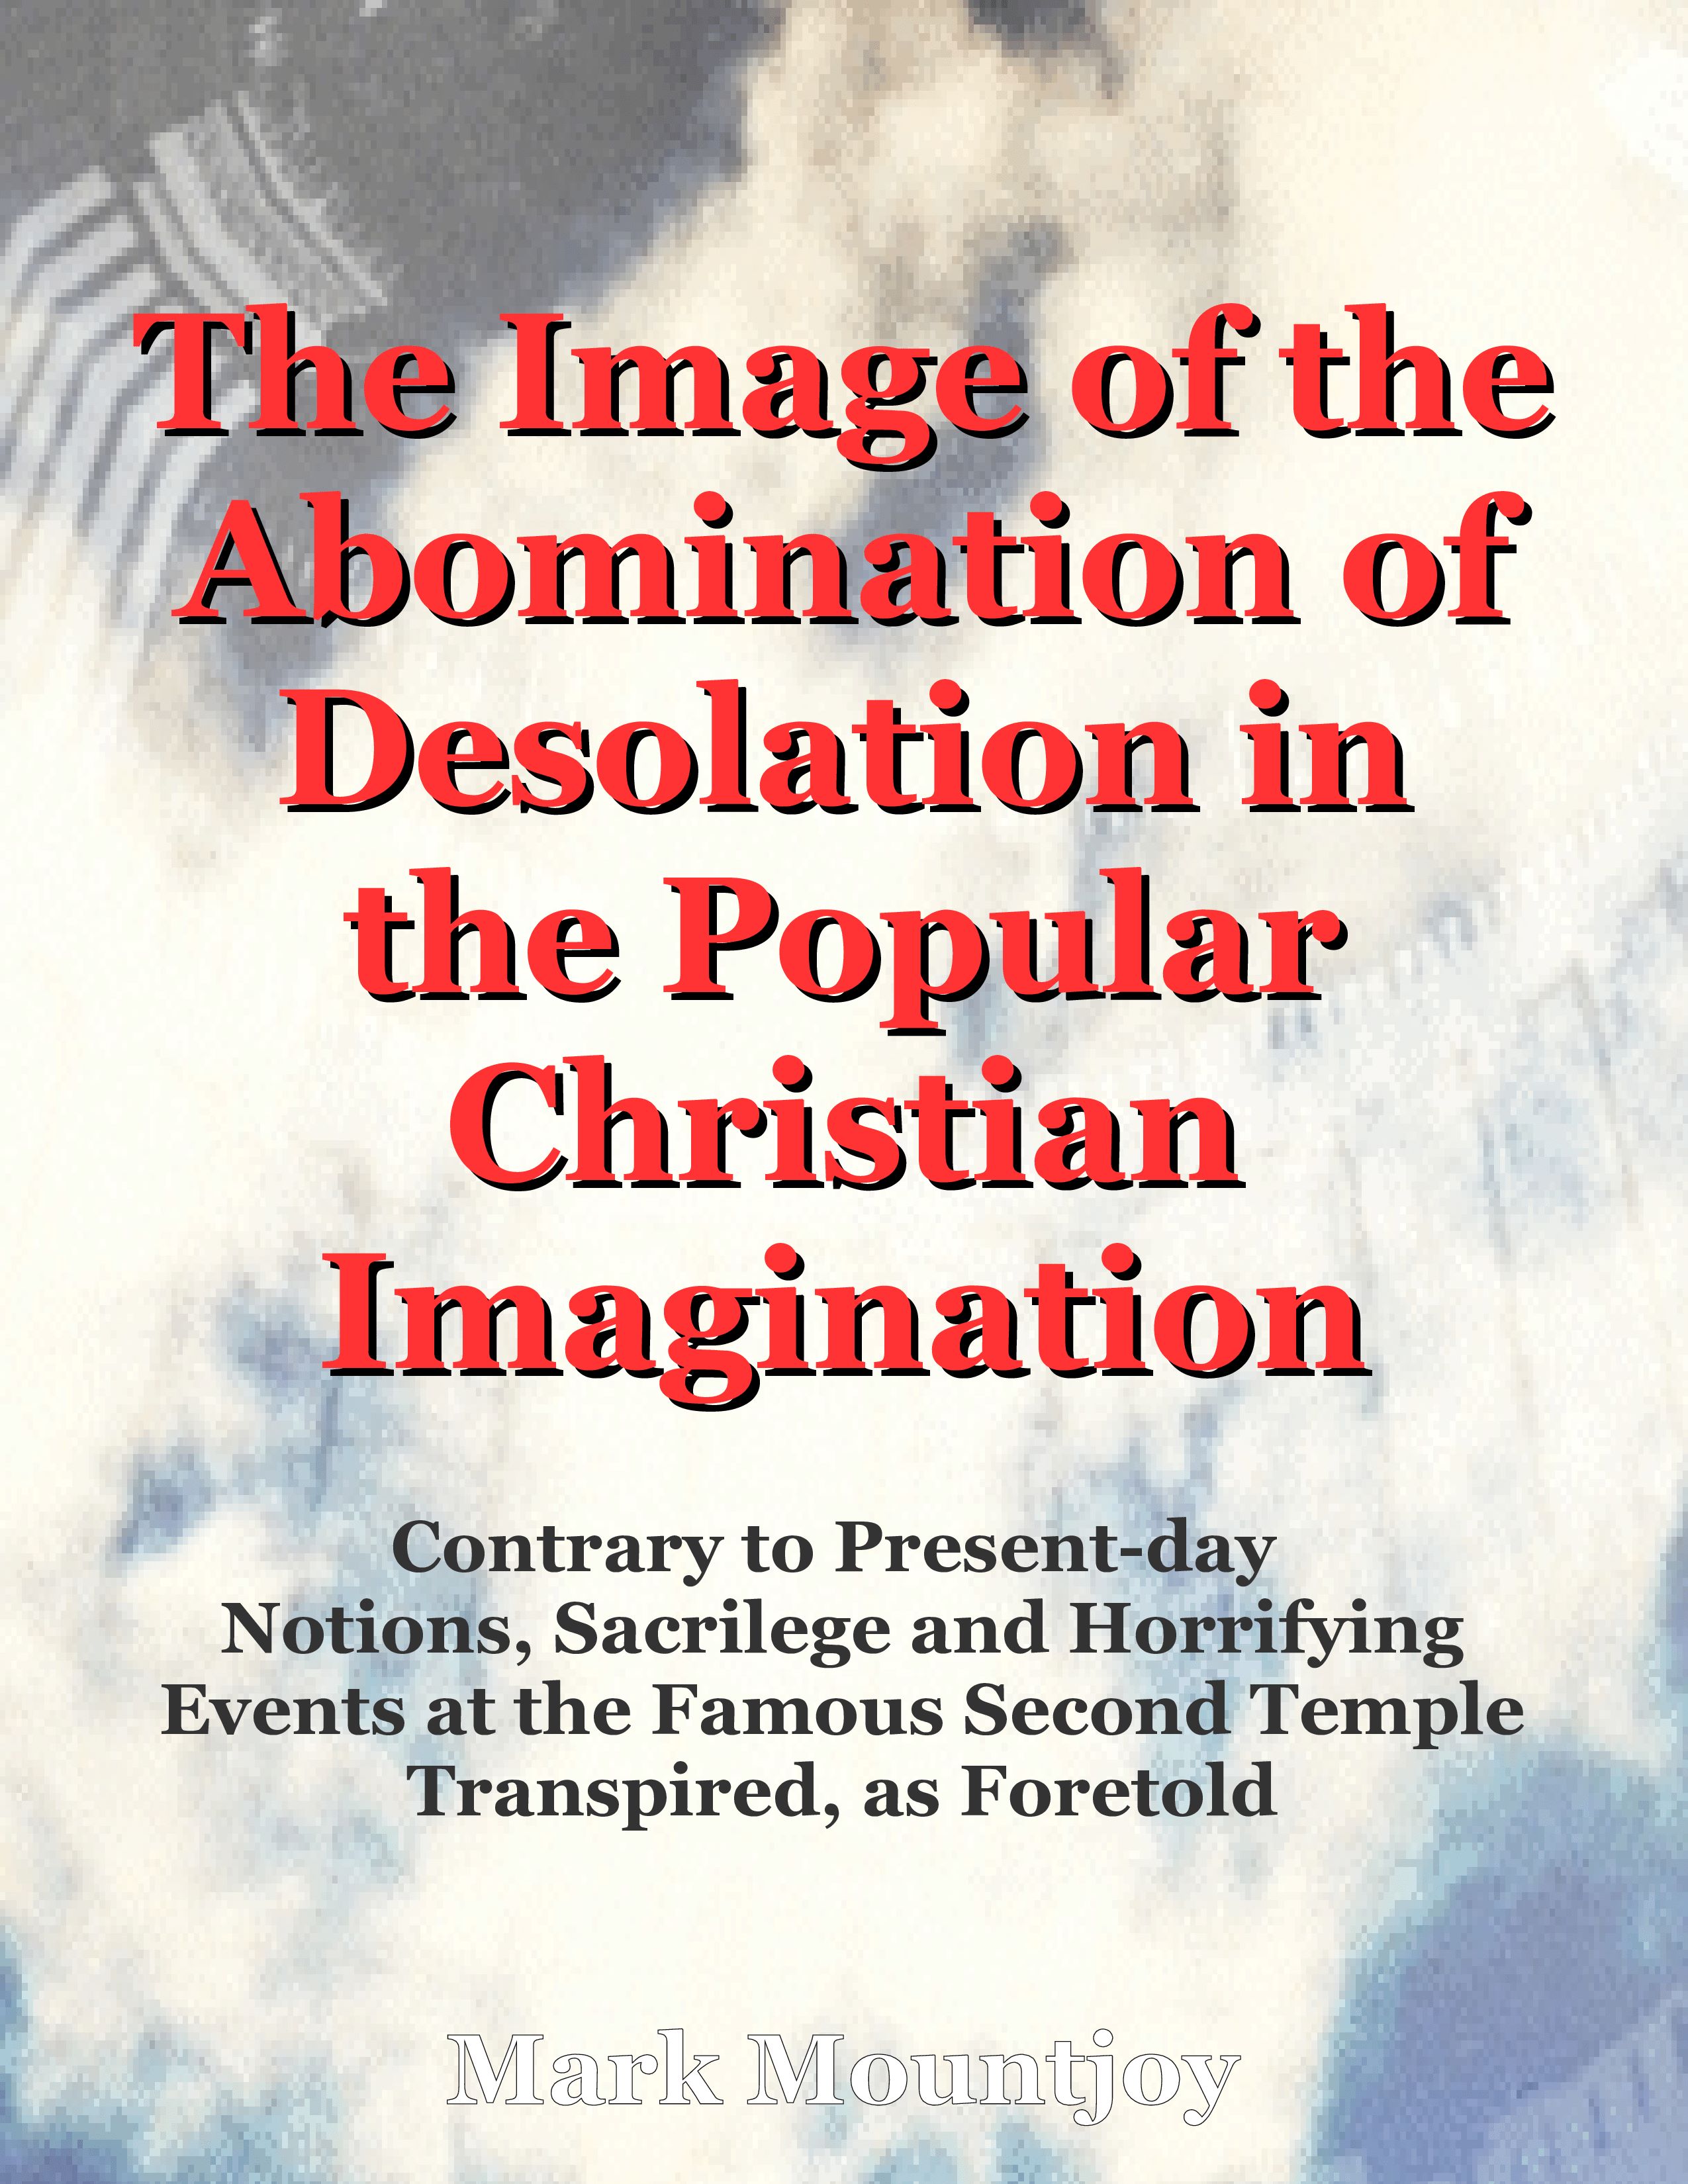 The Image of the Abomination of Desolation in the Popular Christian Imagination